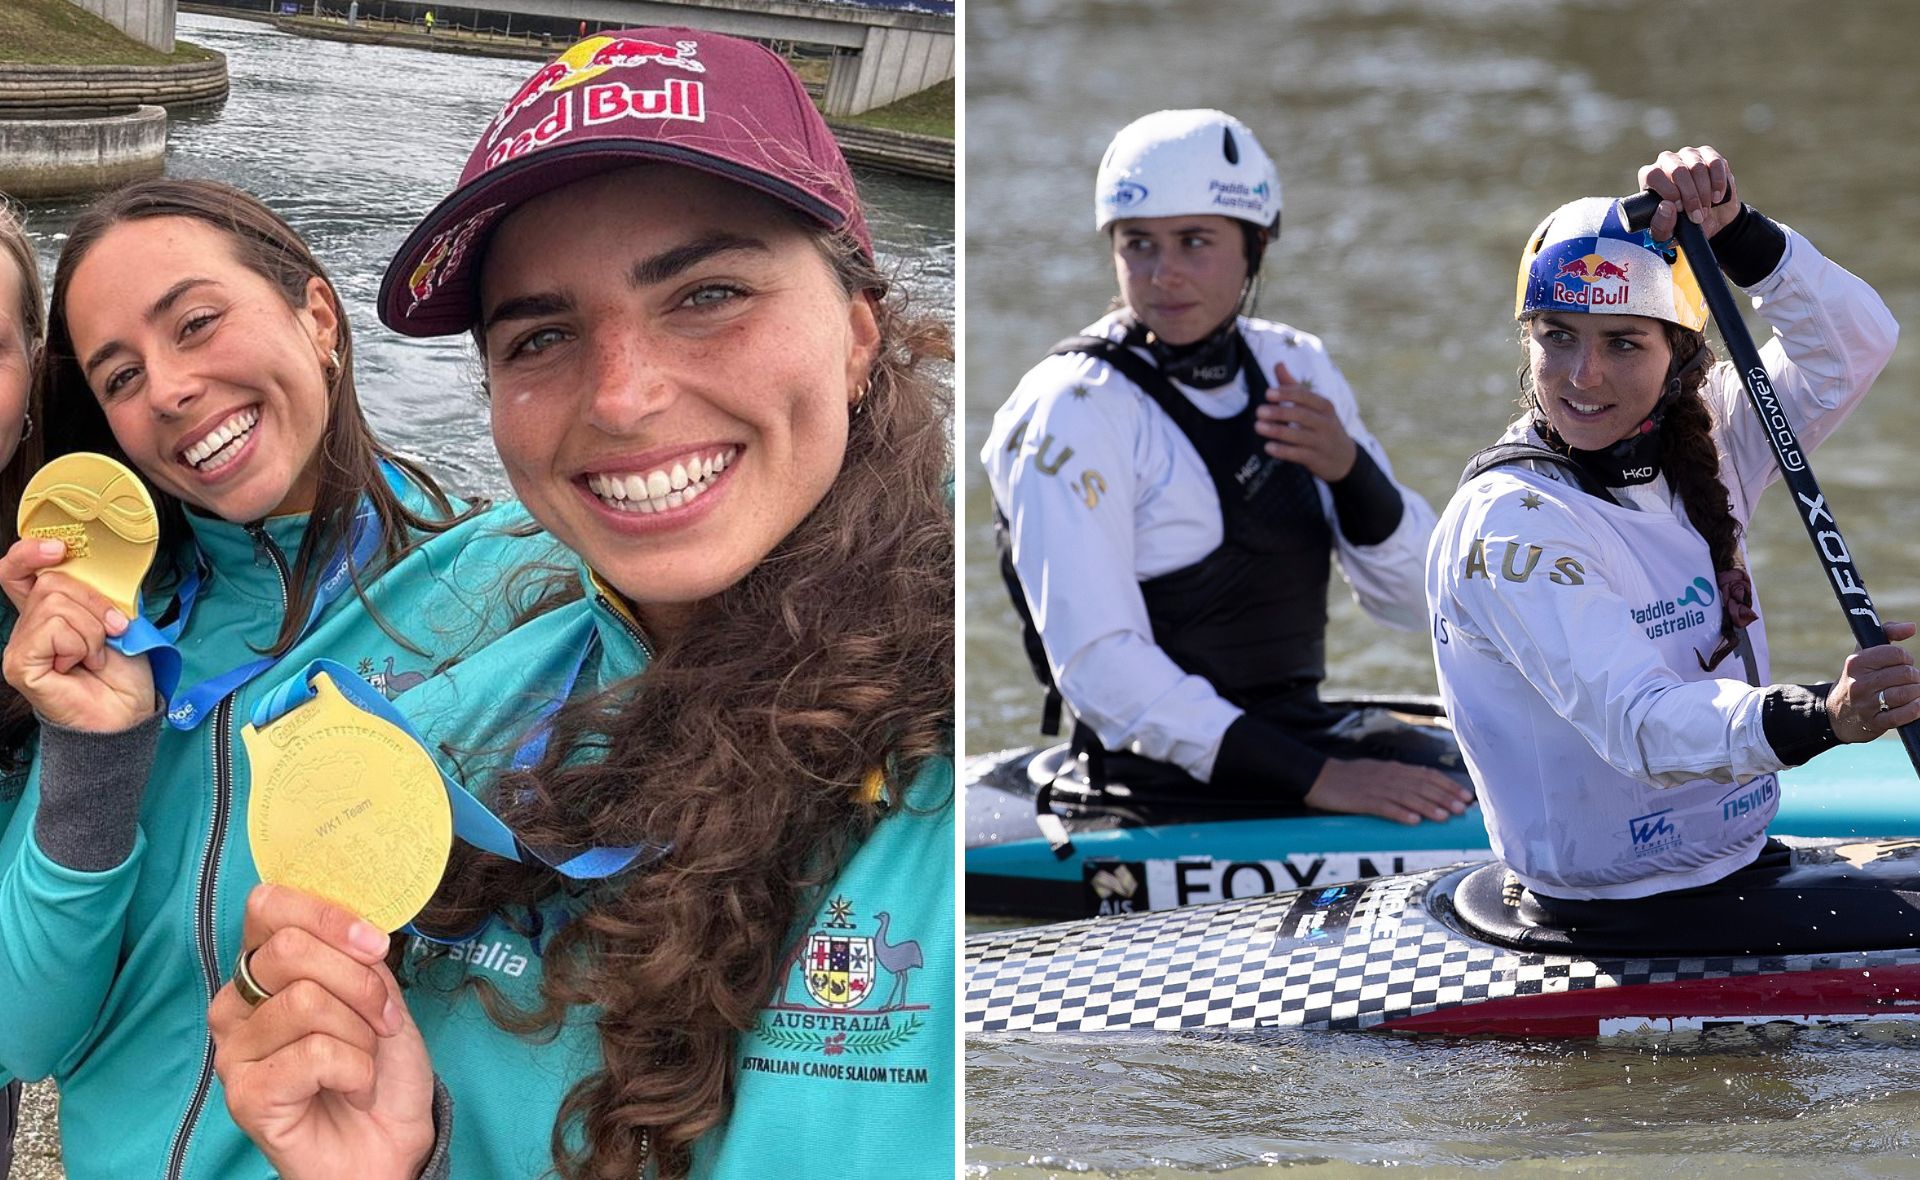 Fox sisters Jess and Noemie to take on the Paris 2024 Olympics together